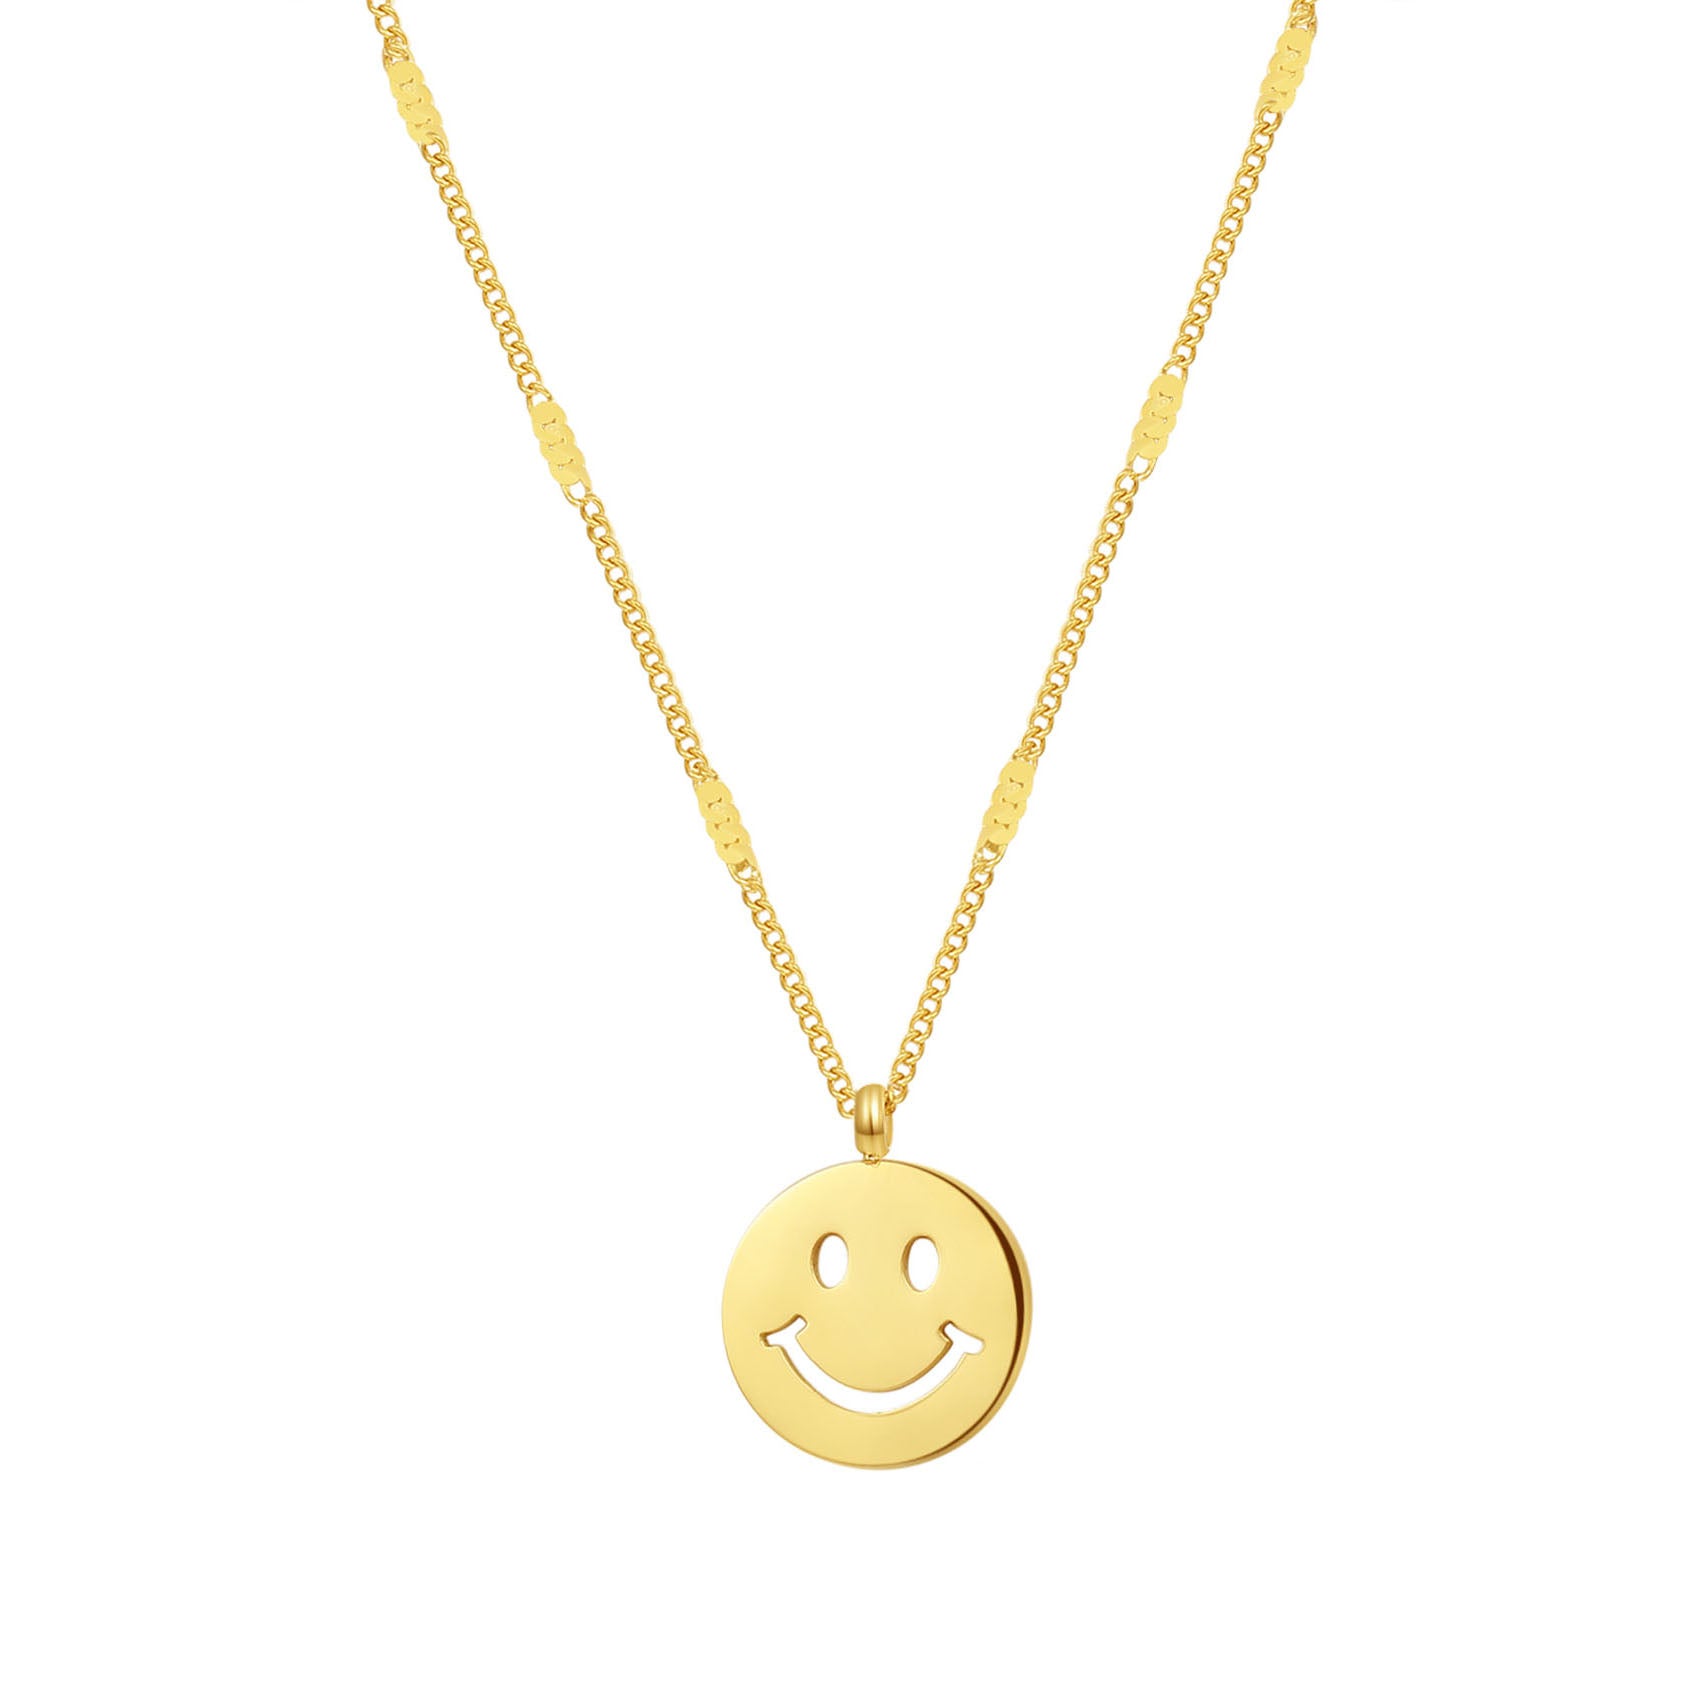 Kette Smiley Gesicht Anhänger Sterlingsilber Happiness Hey – in Gold